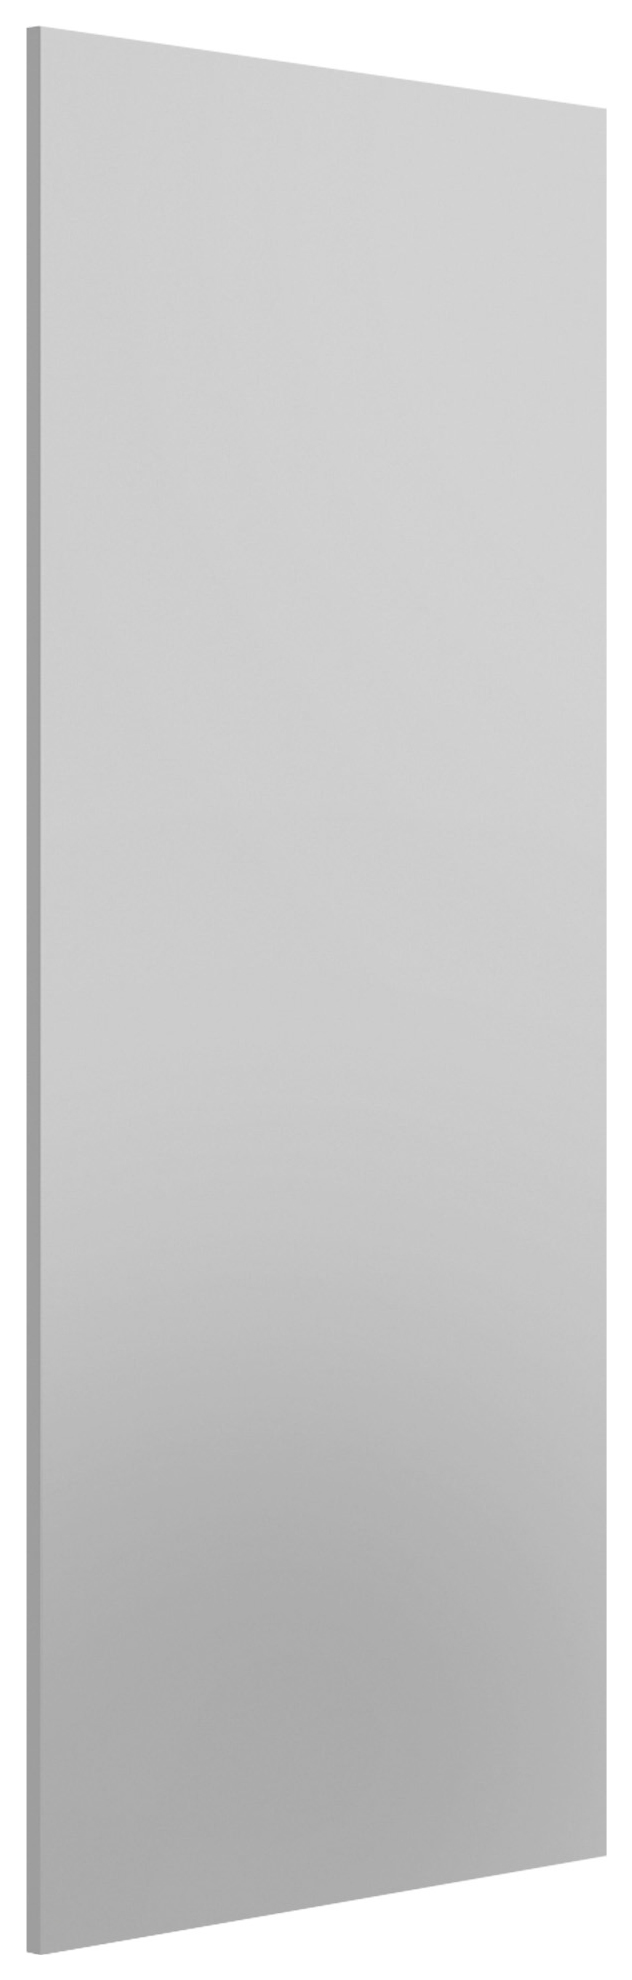 Image of Spacepro Wardrobe End Panel Dove Grey - 2800mm x 620mm x 18mm with Fixing Blocks